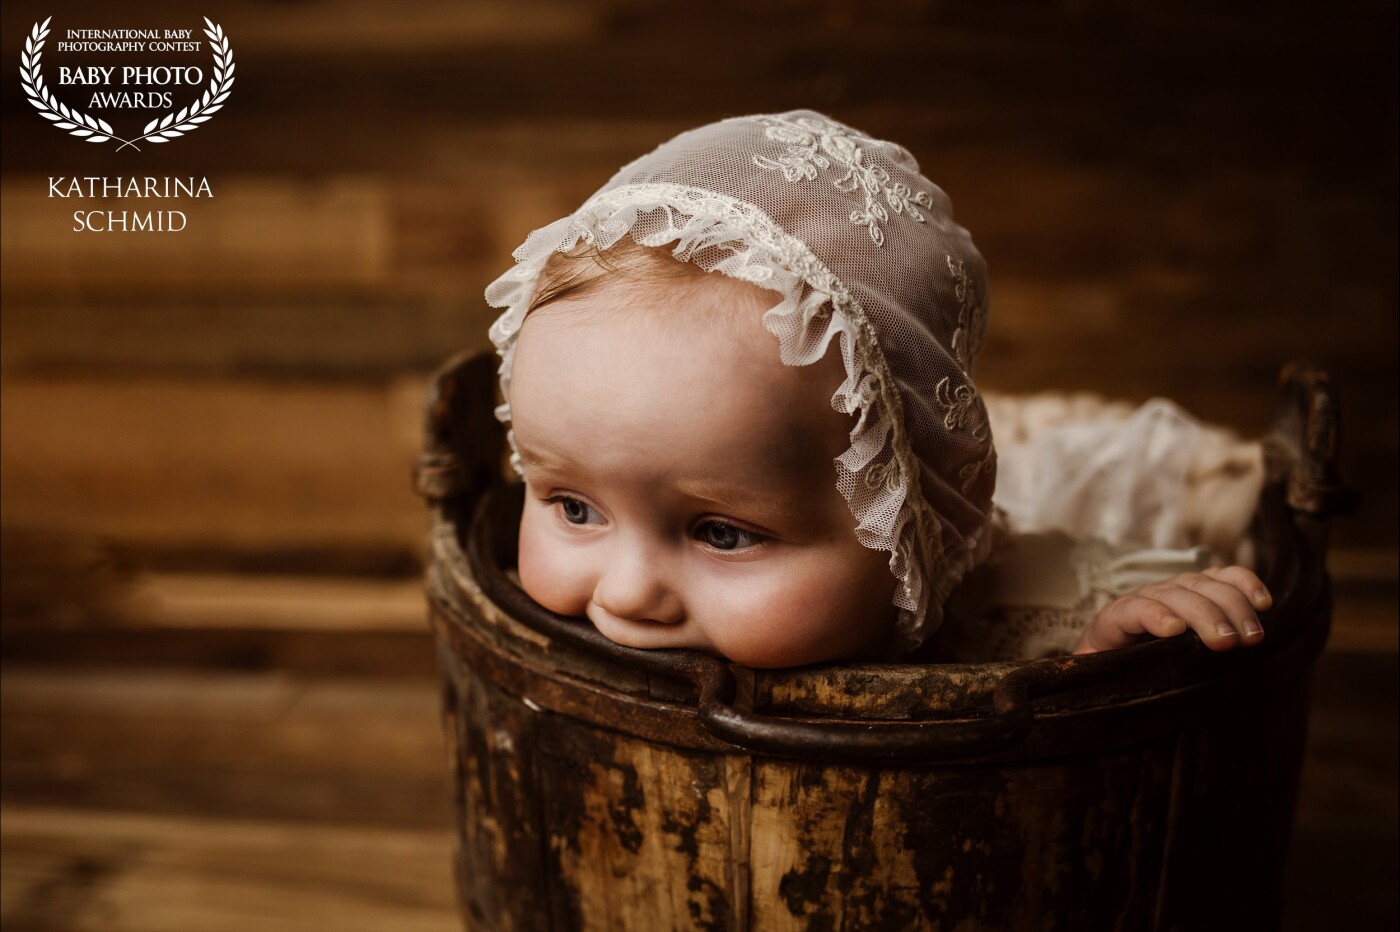 Yummy, this wooden bucket is so tasty ;-) 6-month-old baby girl rocked her shooting. She did an amazing job and was super cute. It was a wonderful shooting.